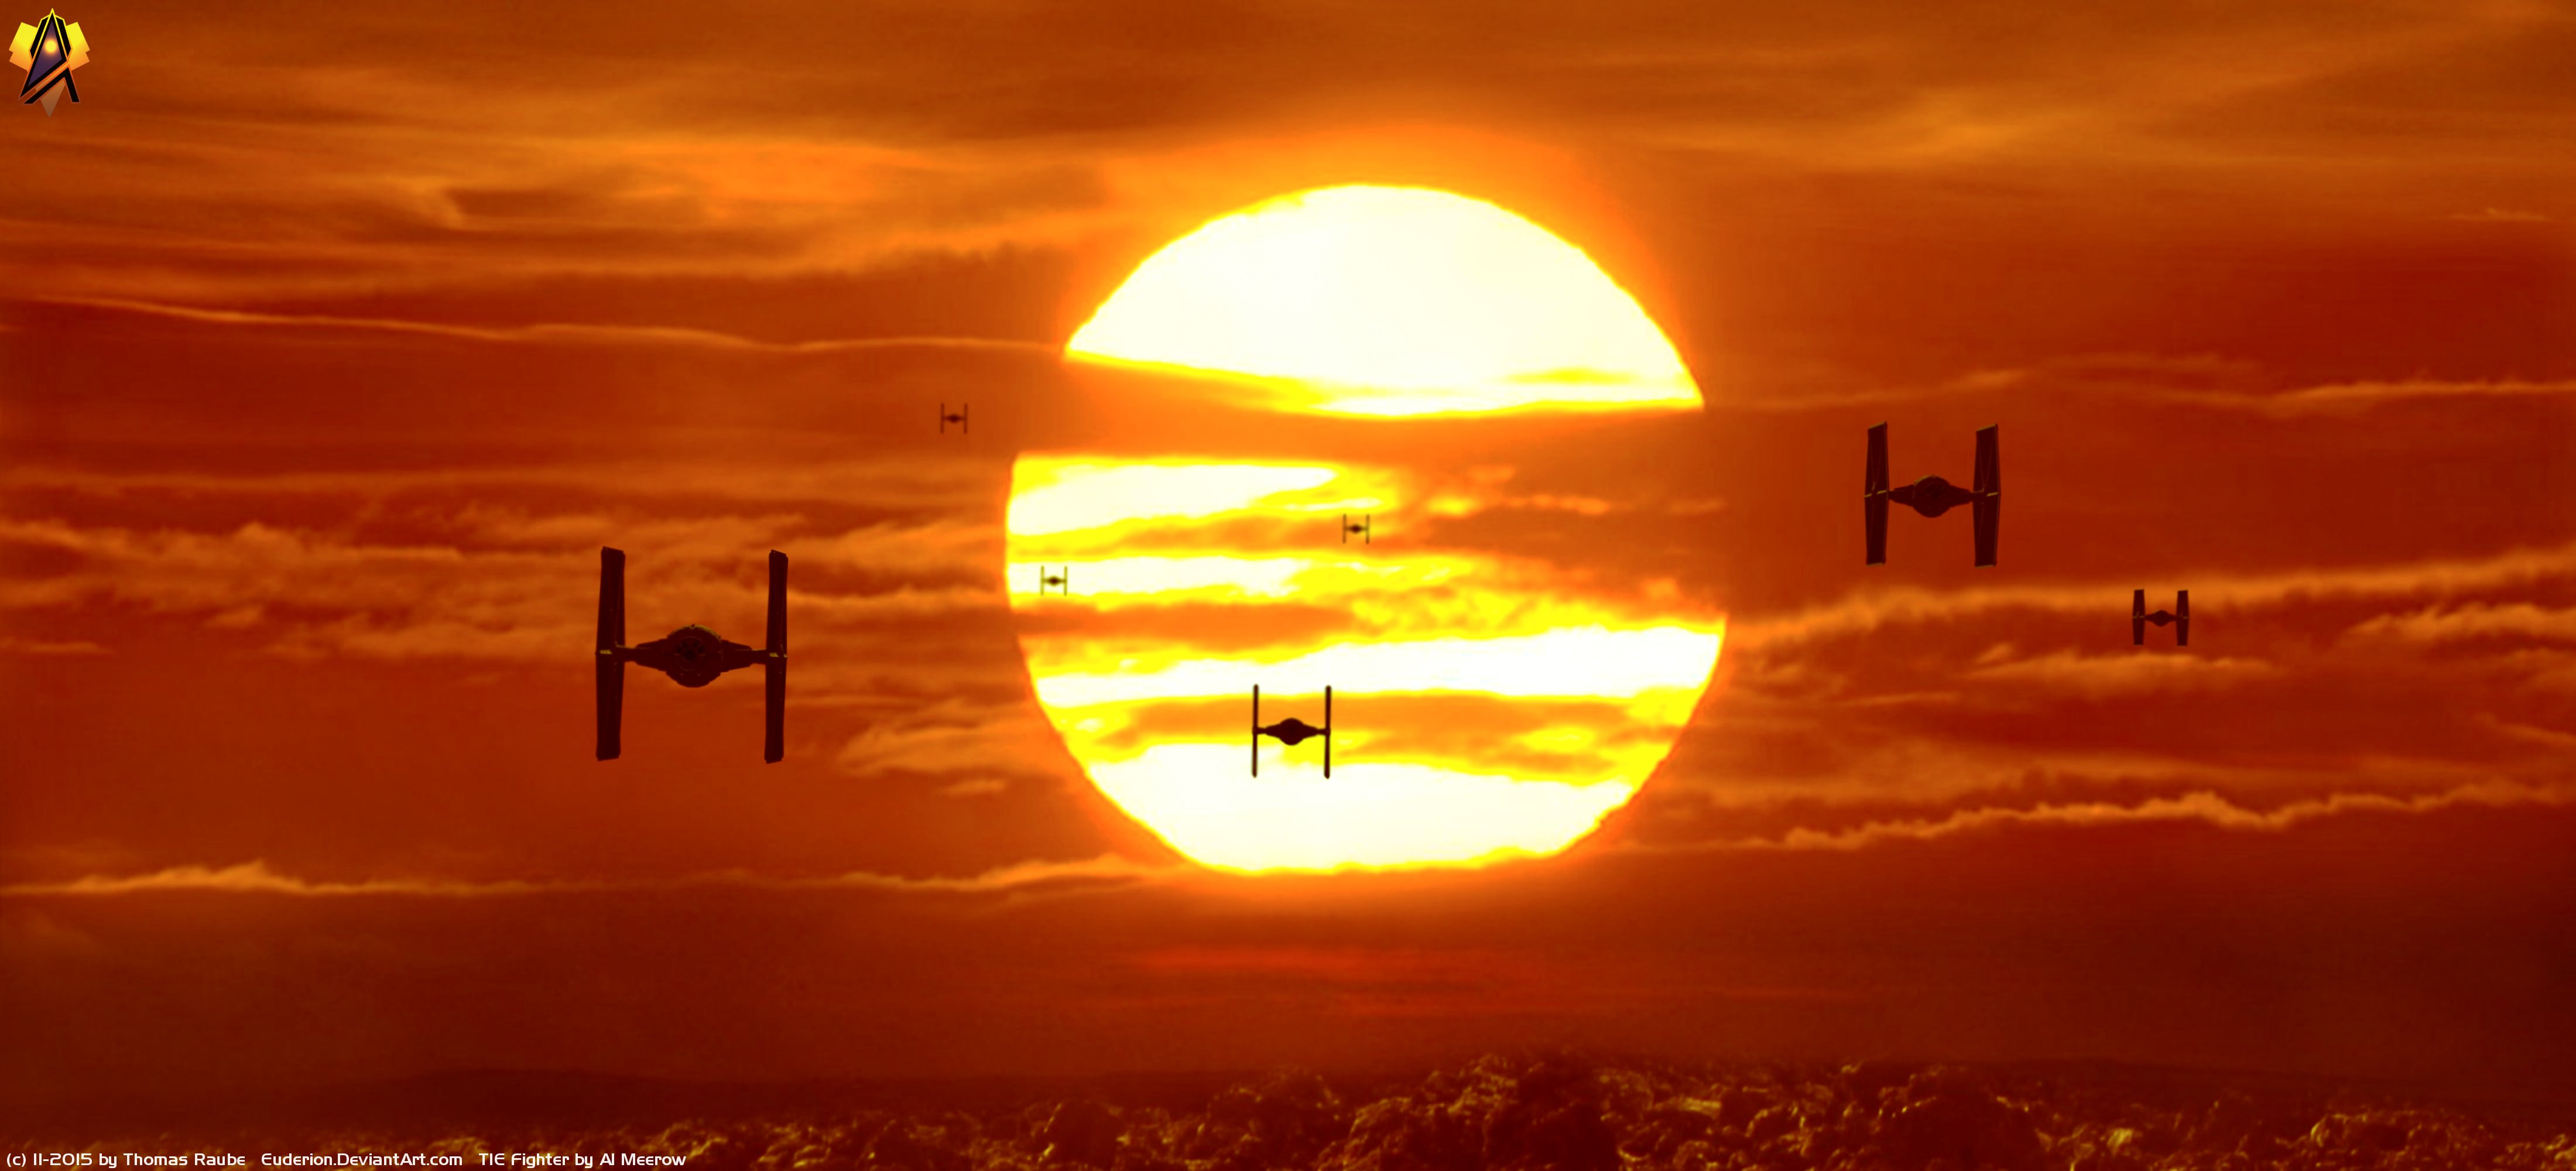 star wars, sunset, tie fighter, movie, star wars episode vii: the force awakens cell phone wallpapers